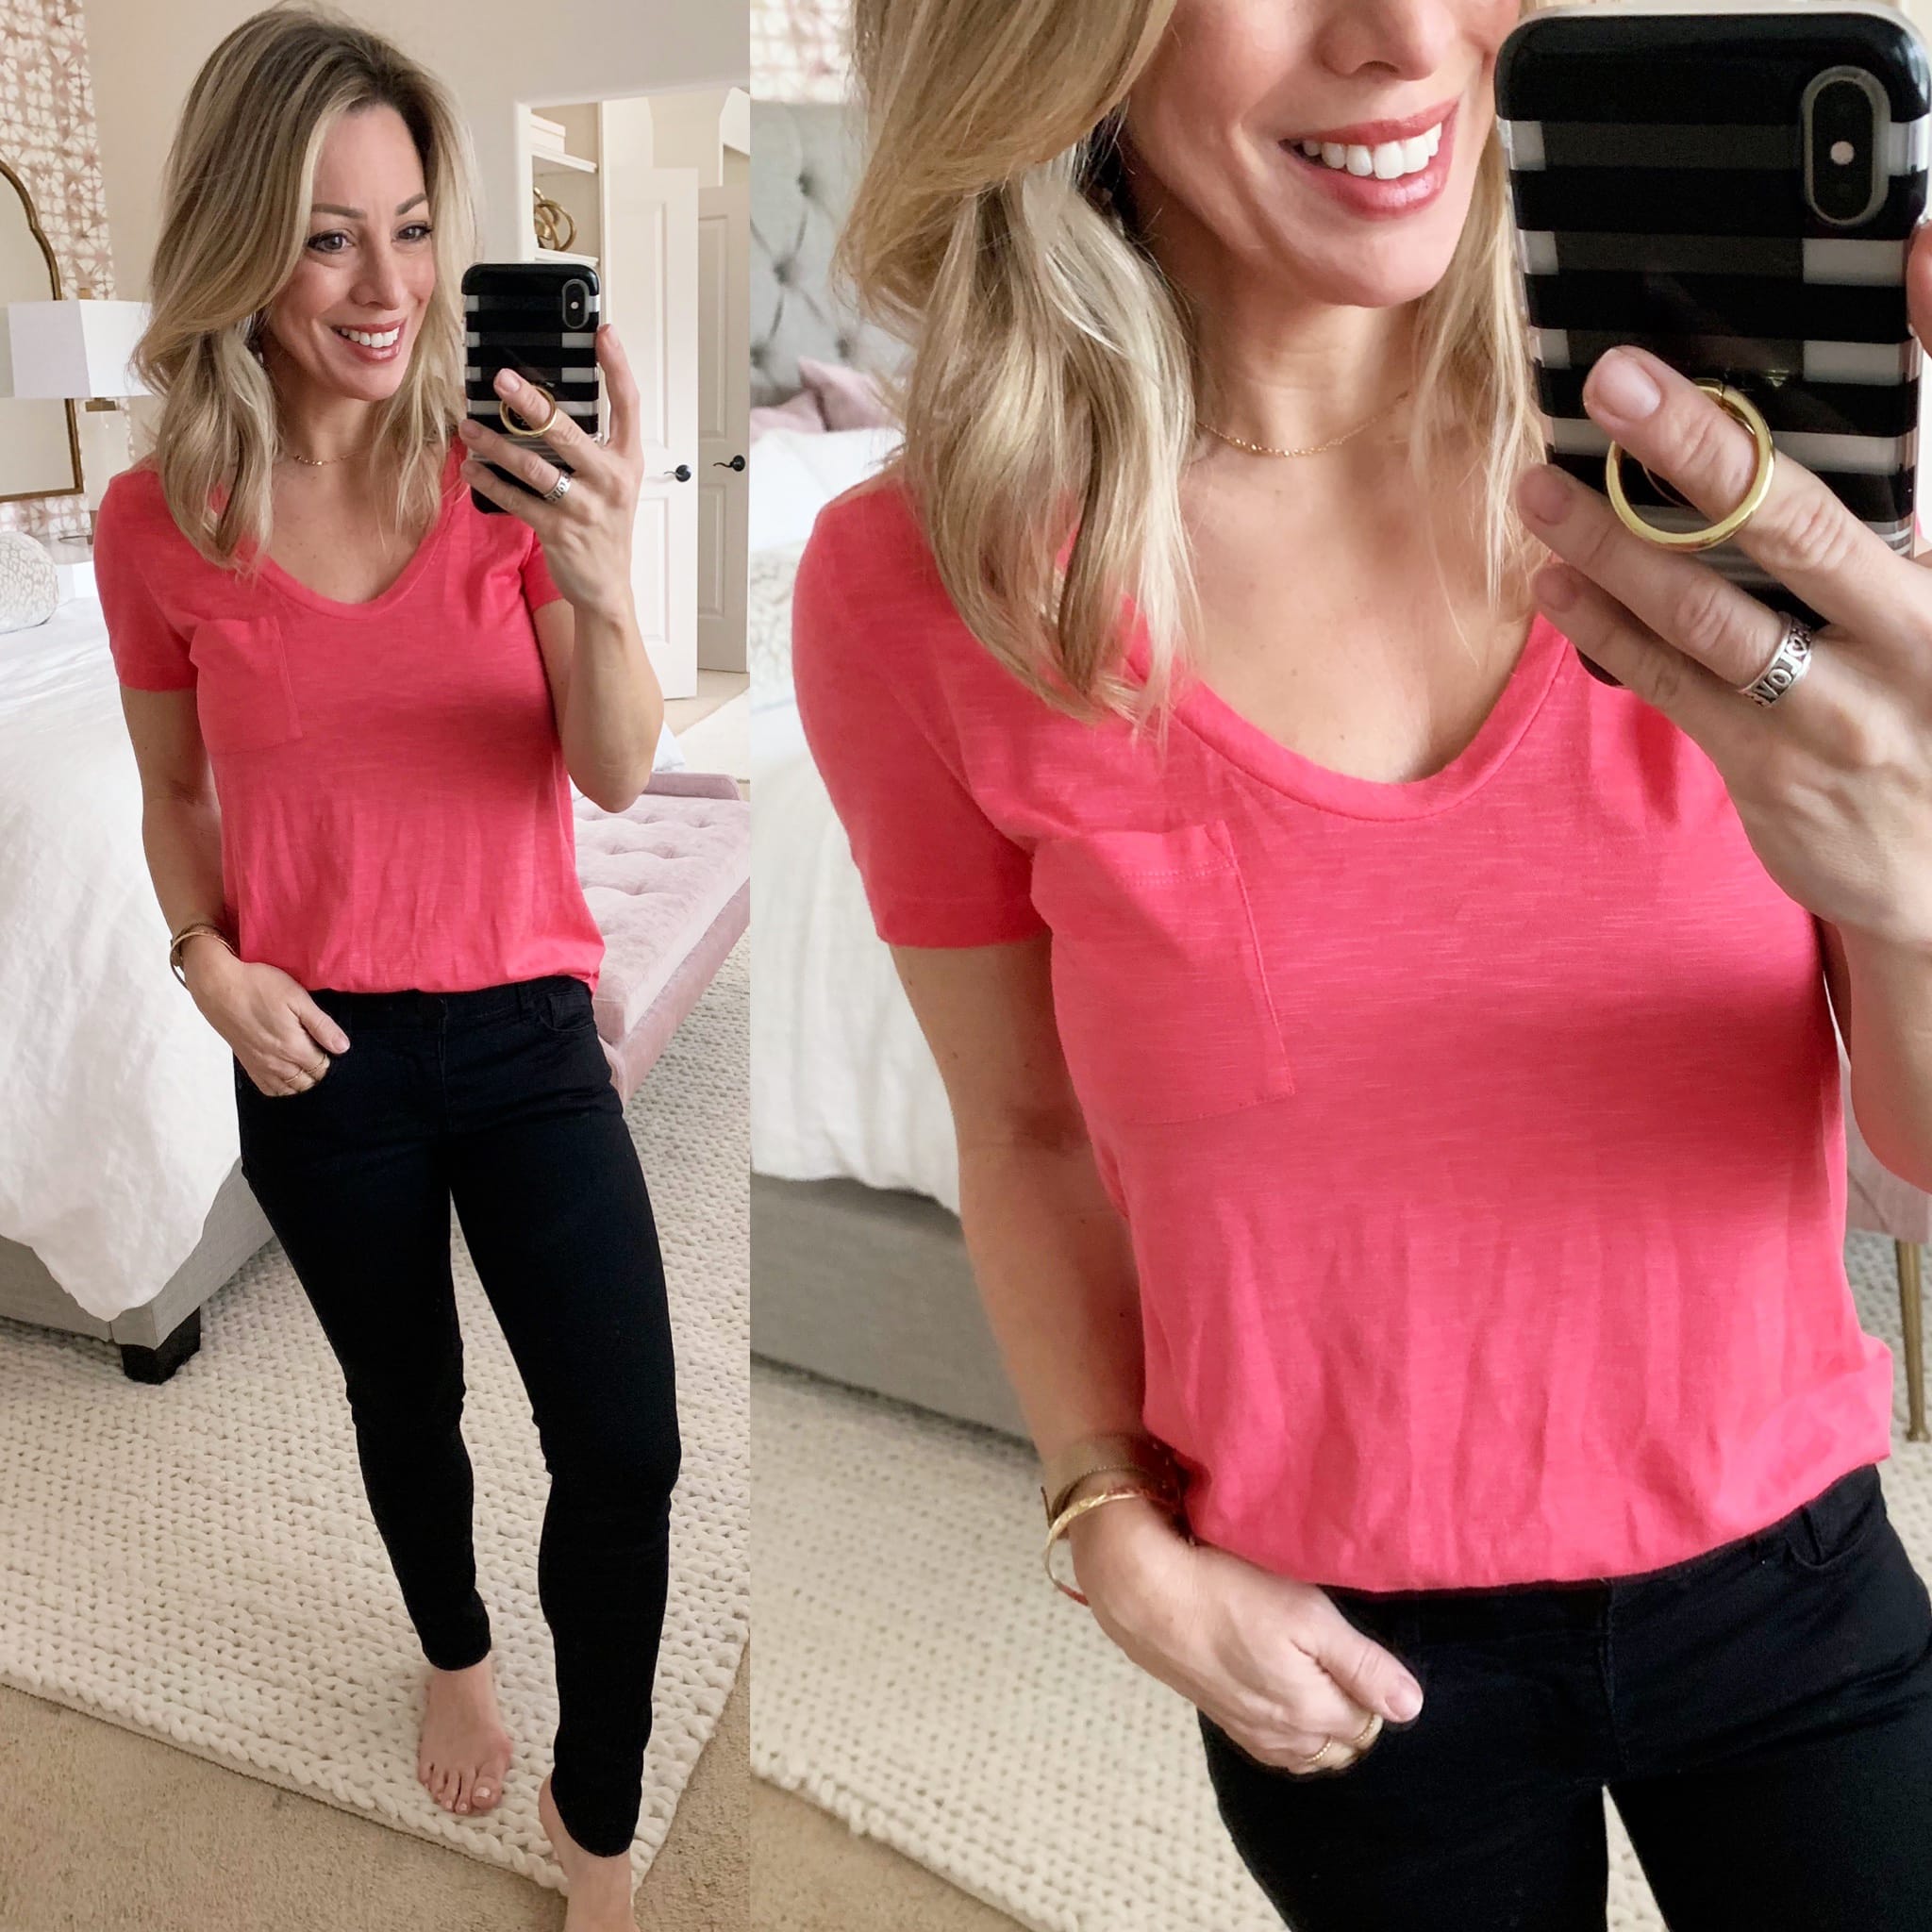 Cute casual outfit - pocket t shirt and black jeans